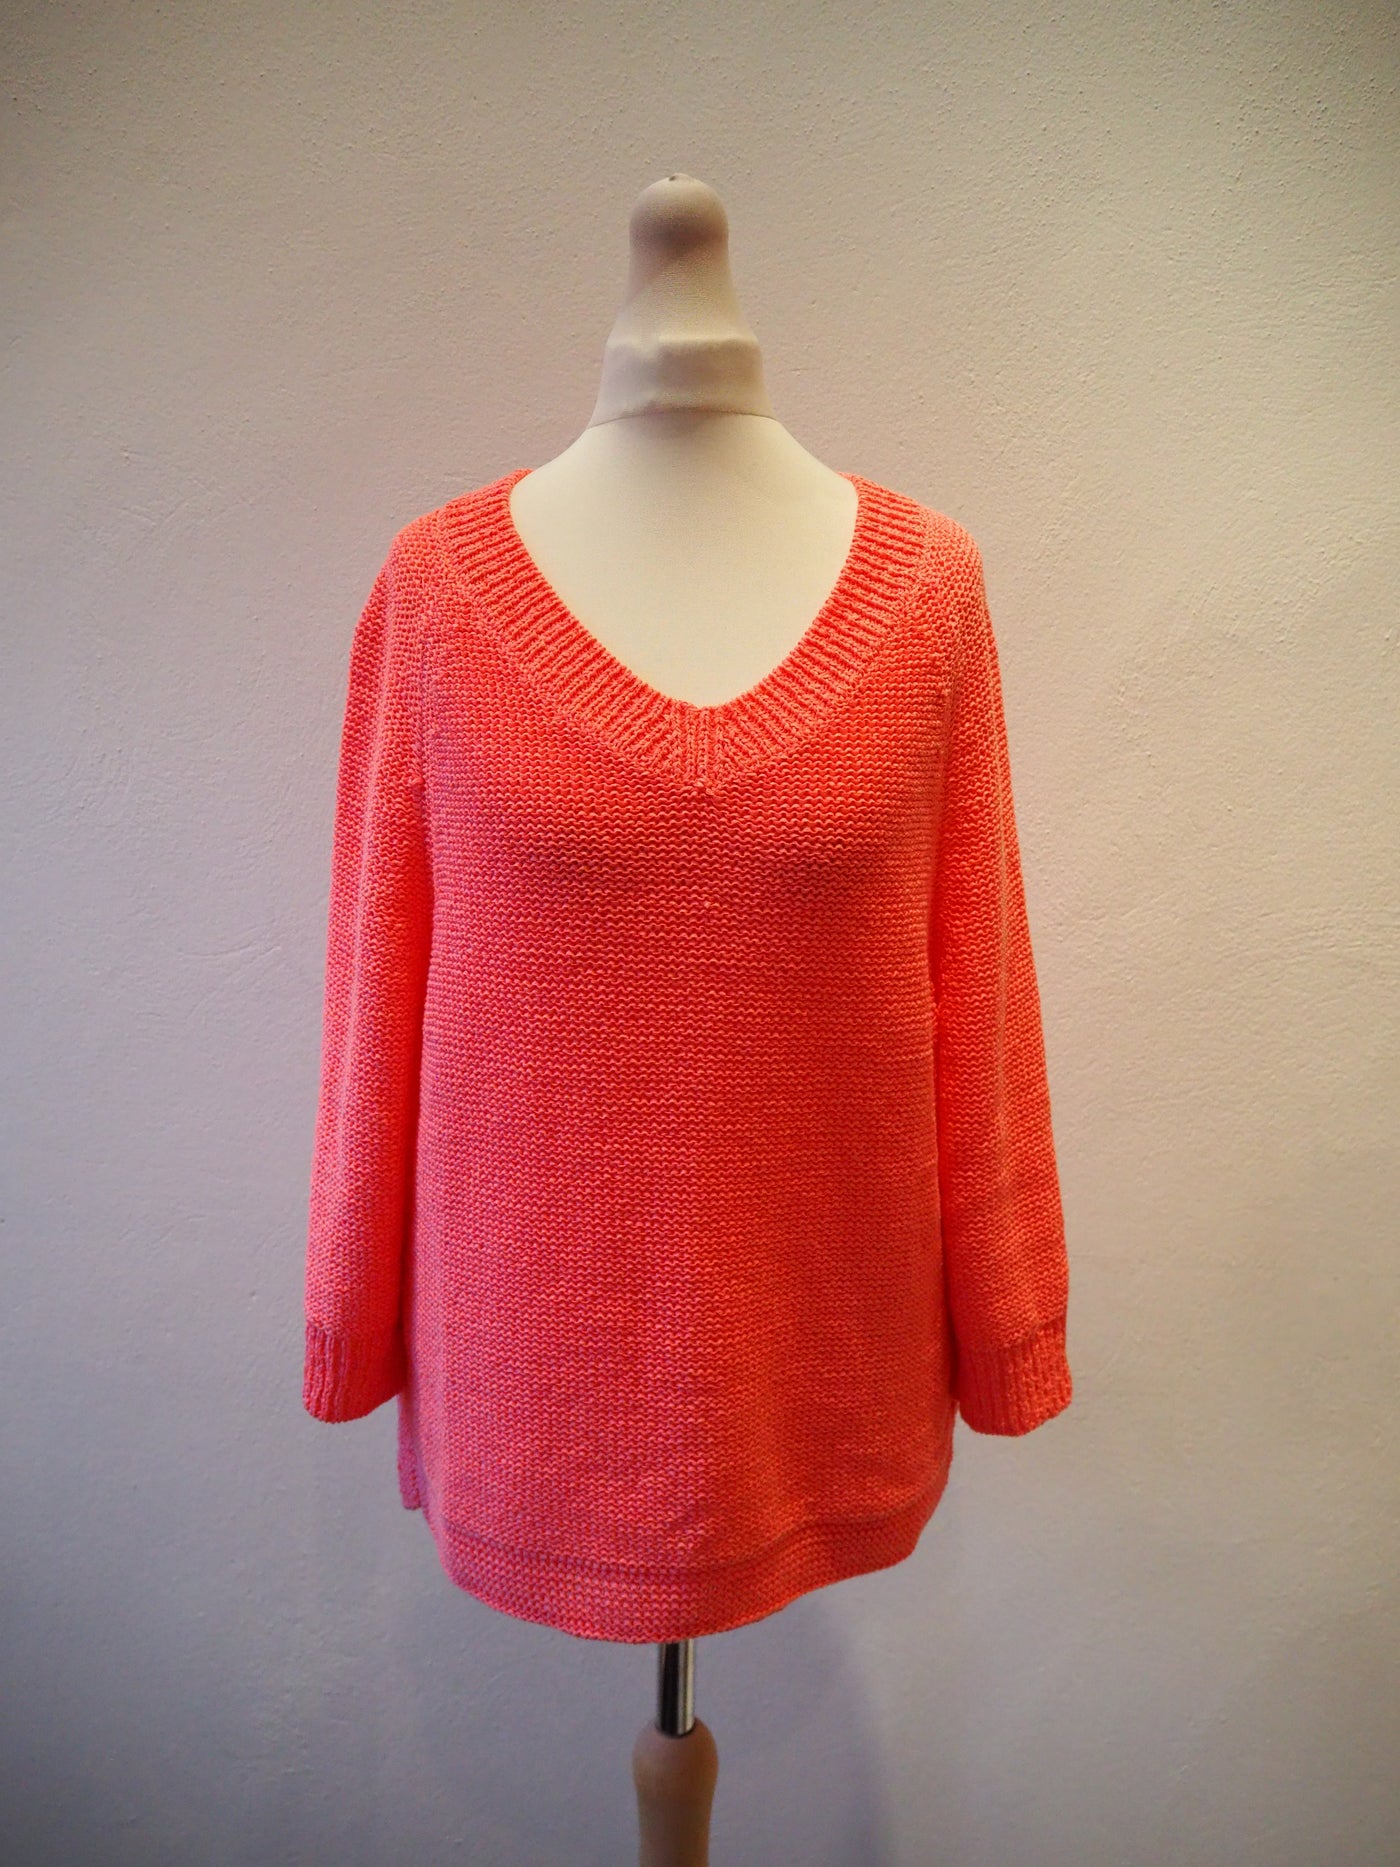 Marco Polo Coral Knit Jumper